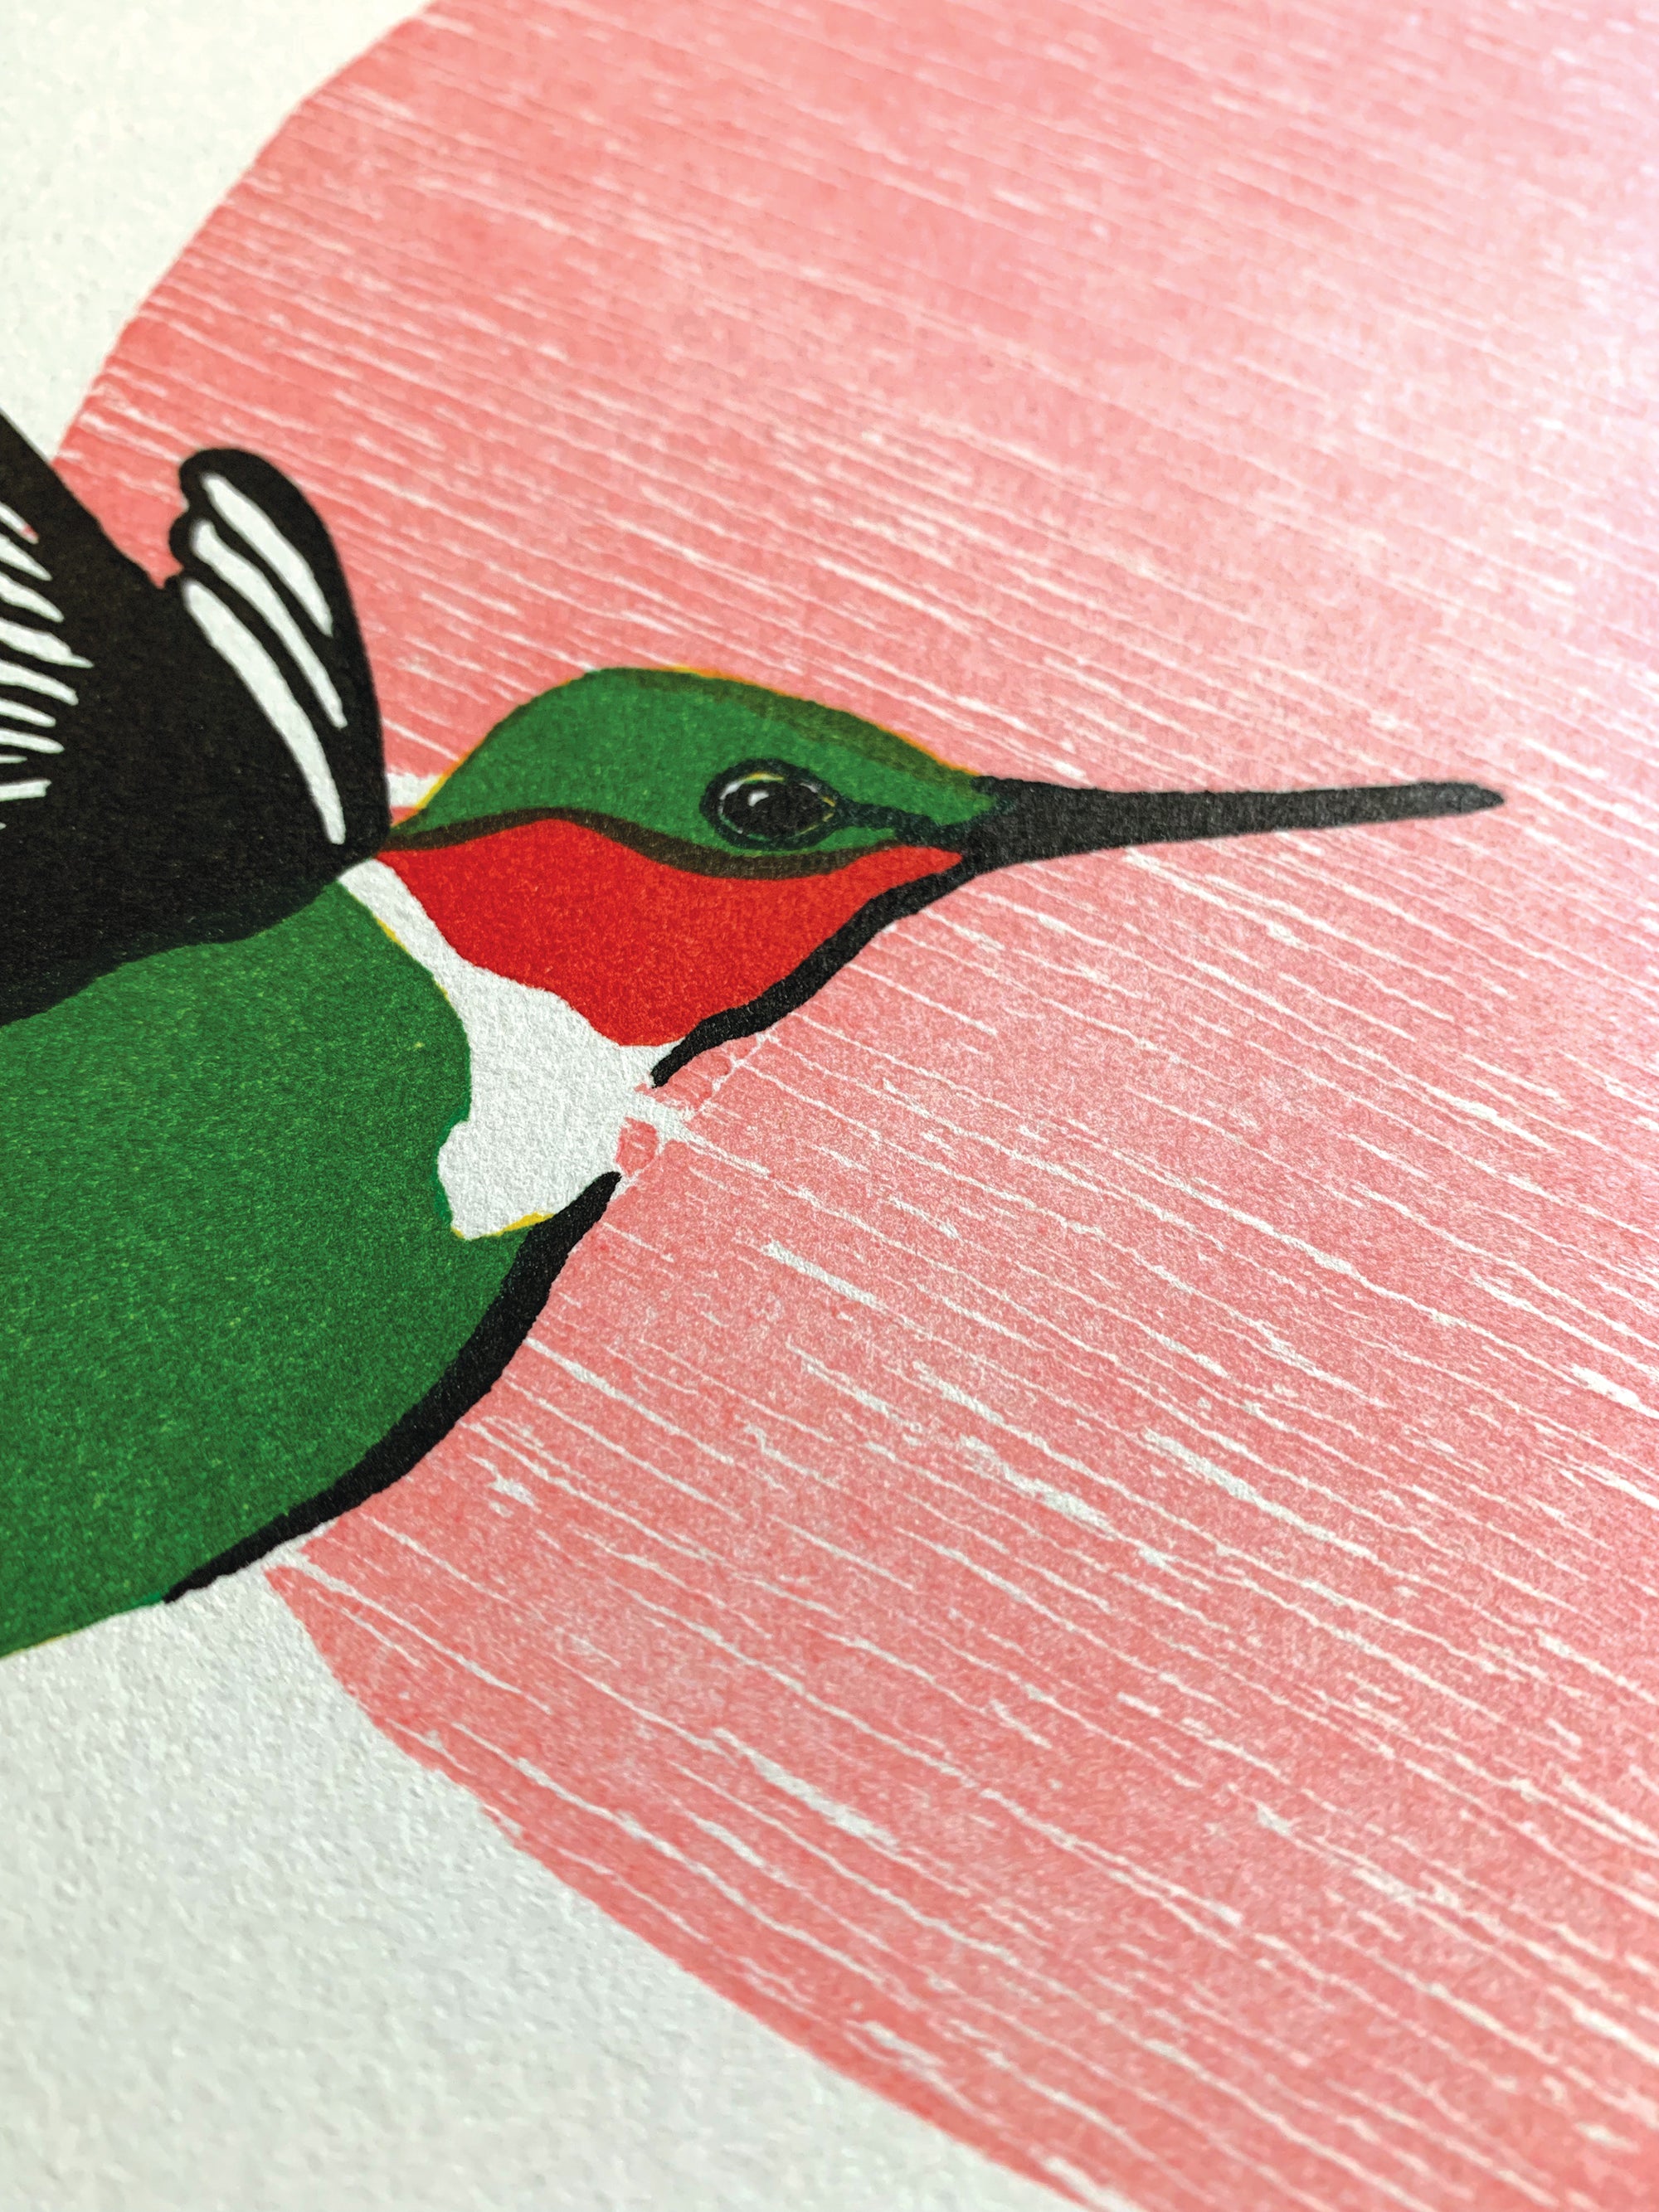 Field Guide Ruby-Throated Hummingbird 5x7 Canvas, Handcrafted